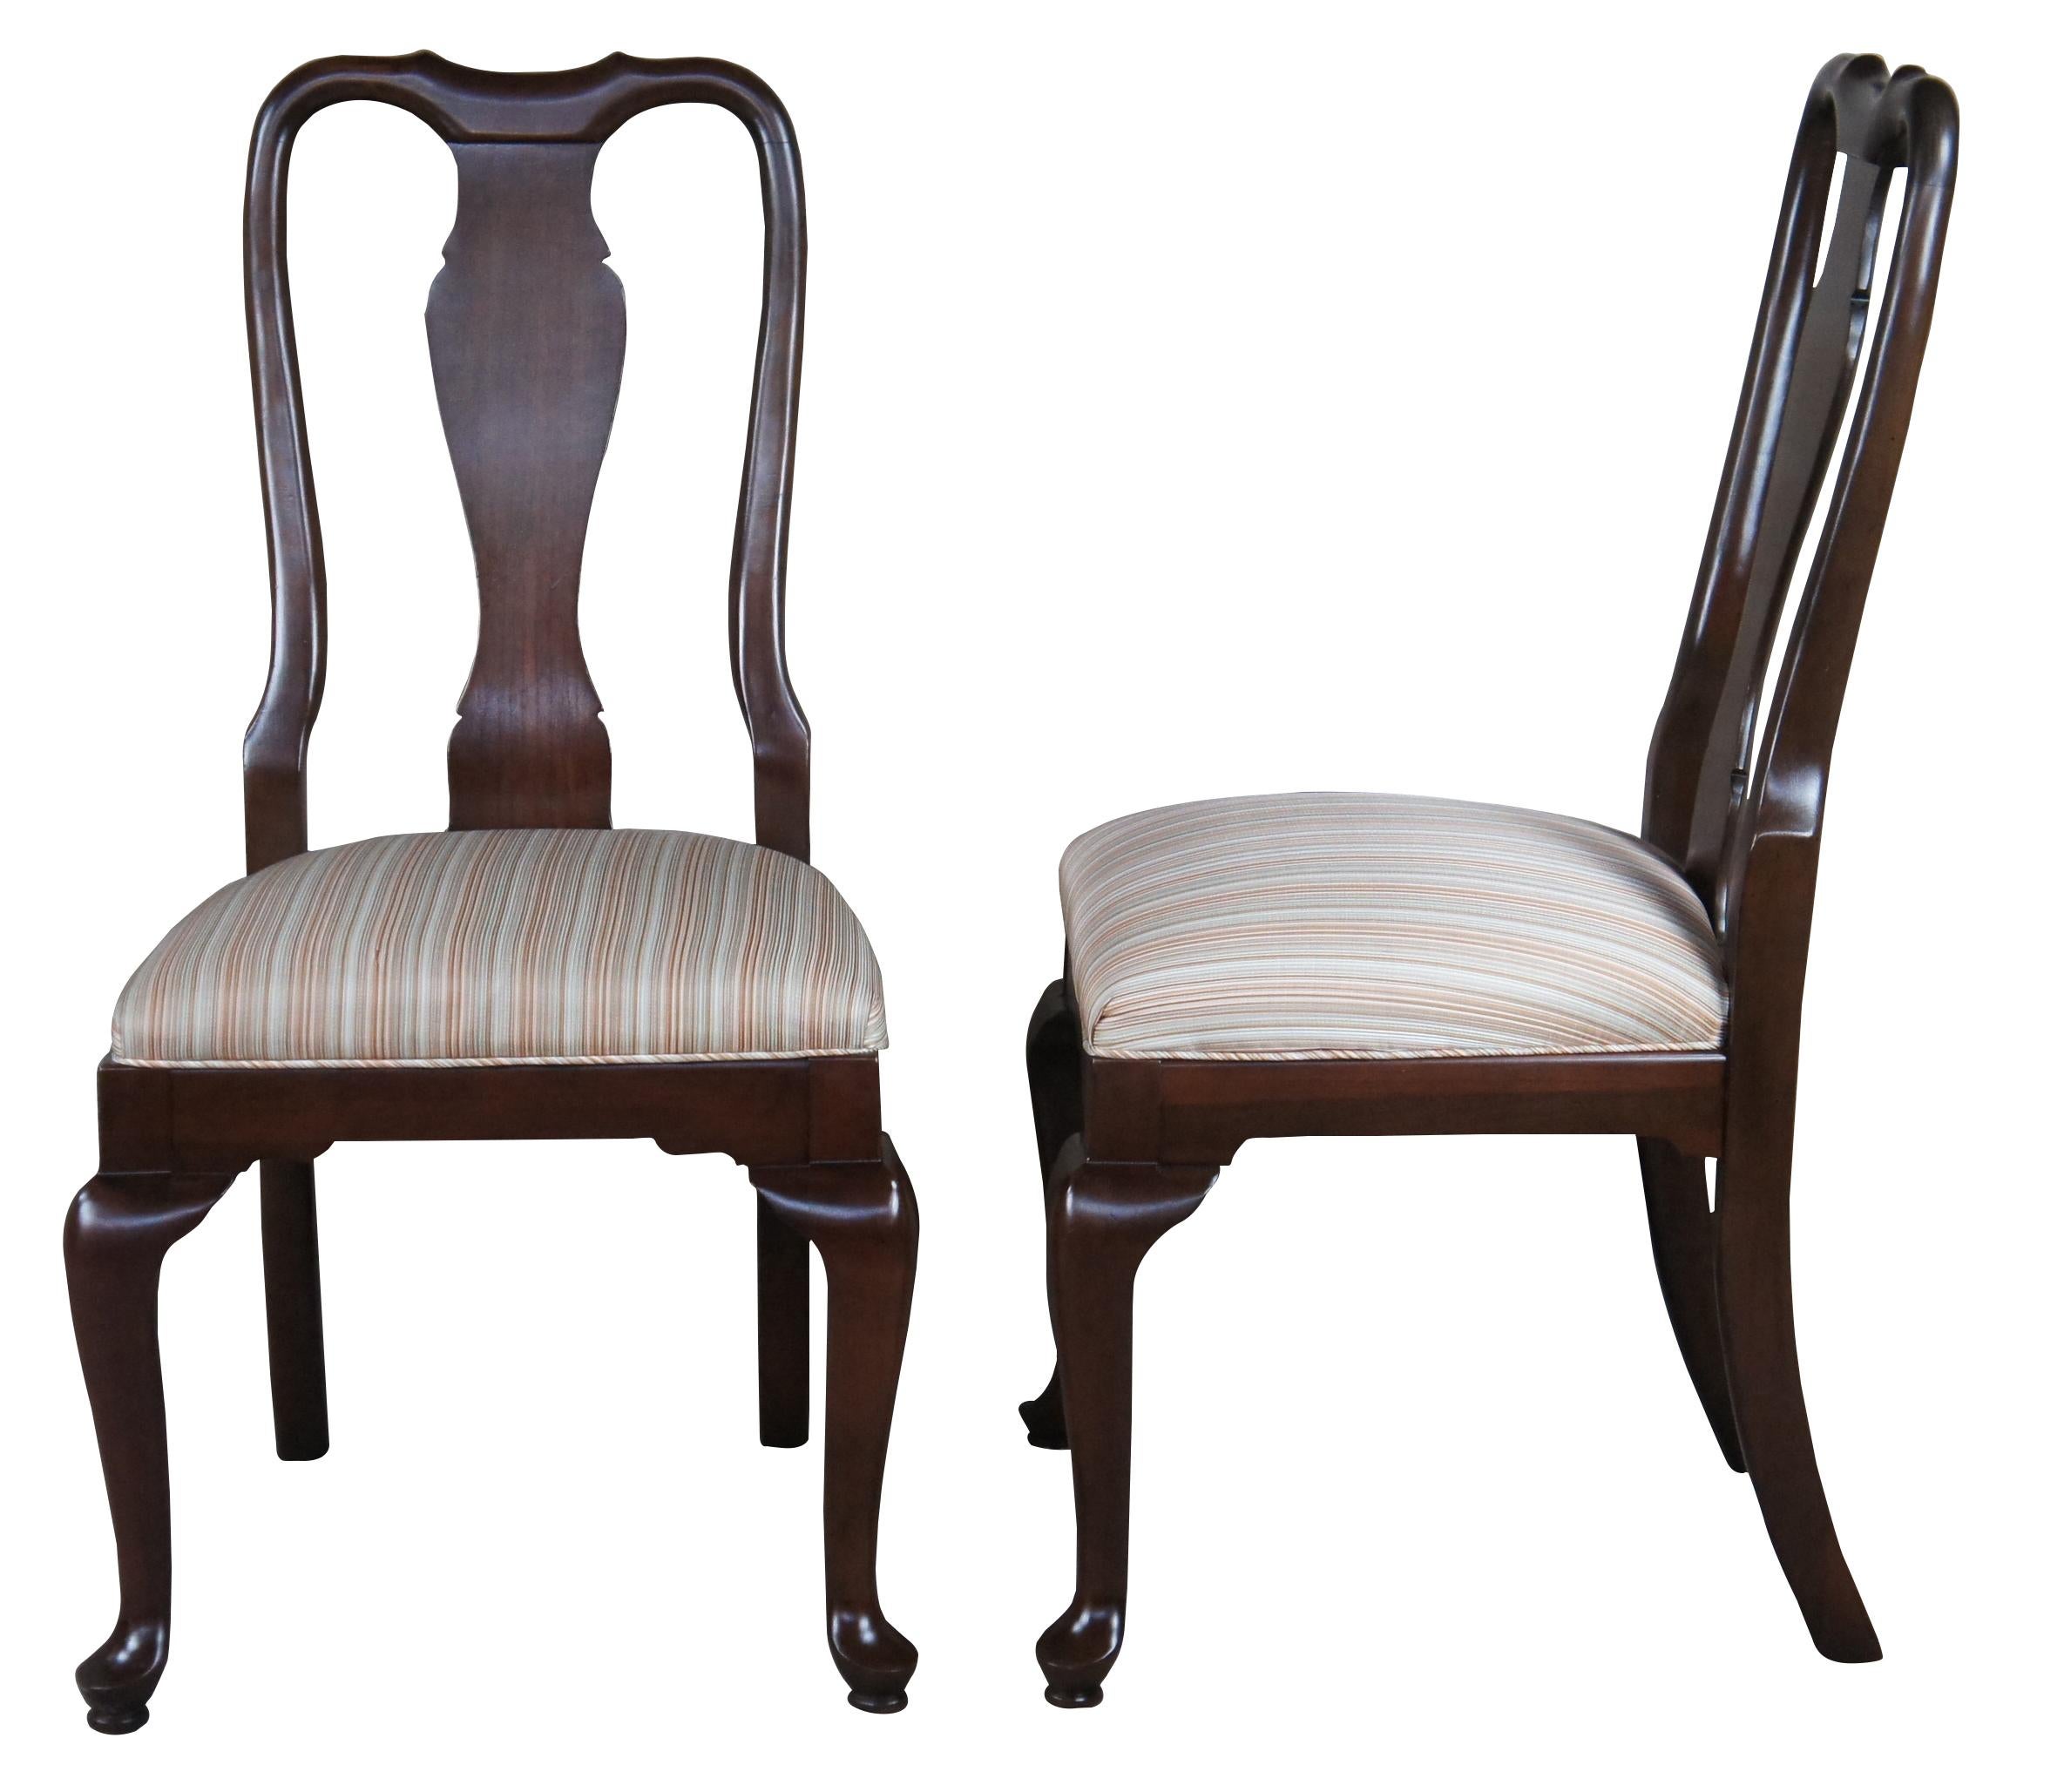 Circa 1980s Ethan Allen Georgian Court Dining Chairs. Made from solid cherry in Queen Anne styling. Features a shaped crest rail over vase shaped splat leading to seats supported by cabriole legs with pad feet. Set includes 6 side chairs. 11-2611